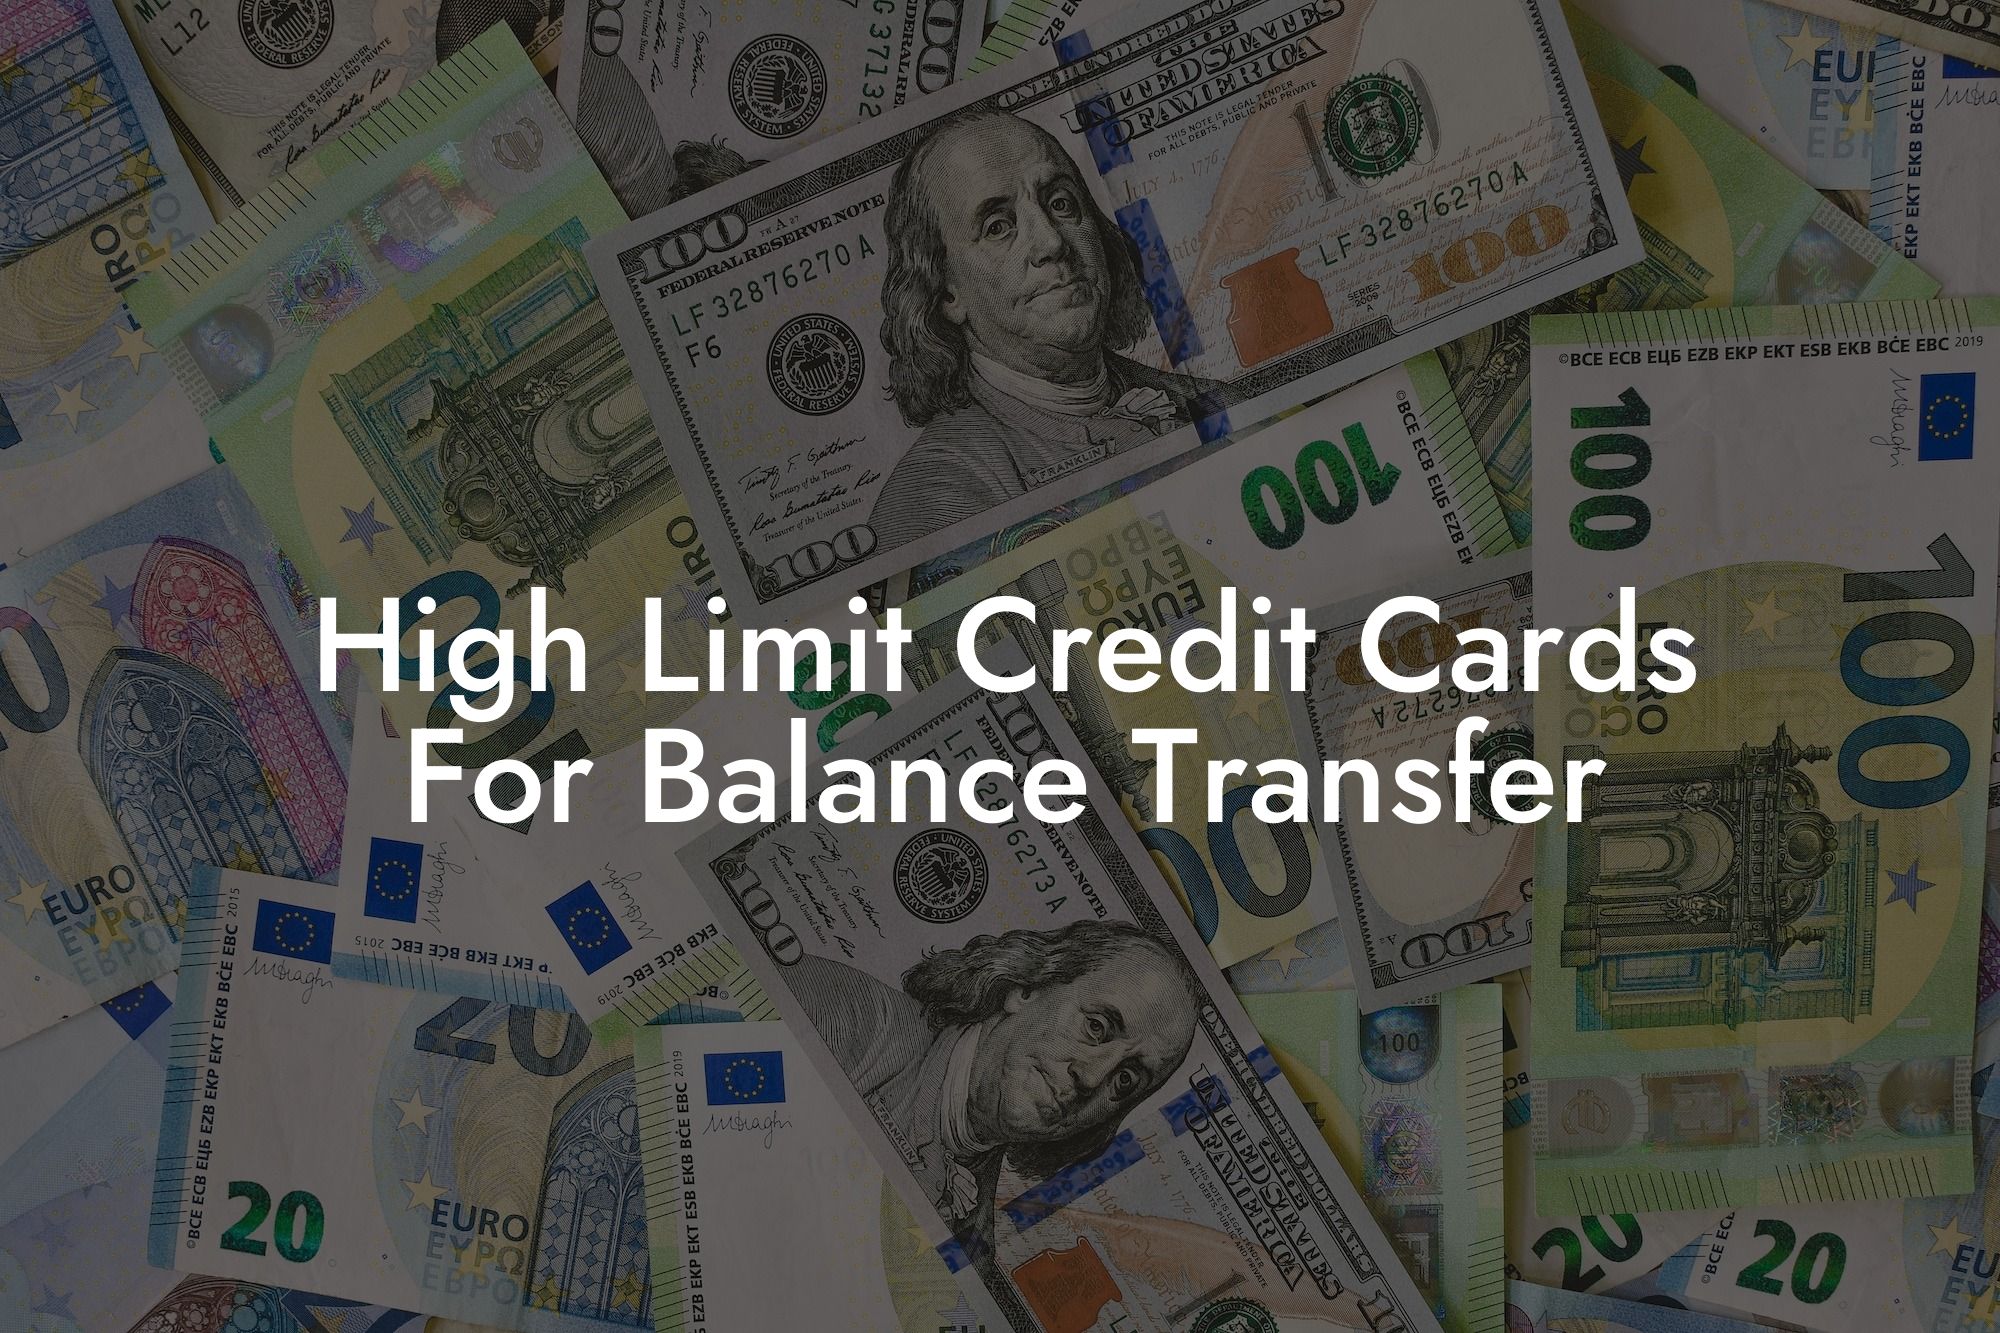 High Limit Credit Cards For Balance Transfer